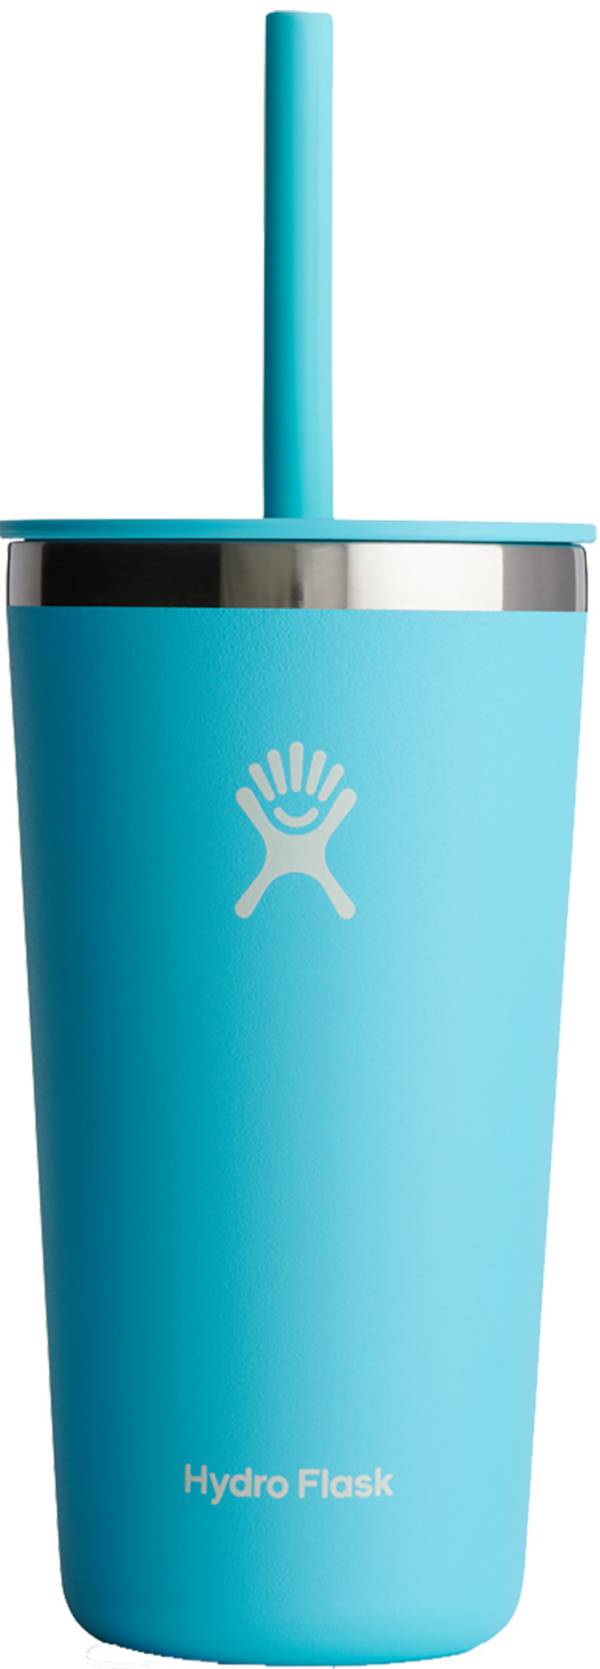 Hydro Flask 20 oz All Around Tumbler w/ Straw lid product image